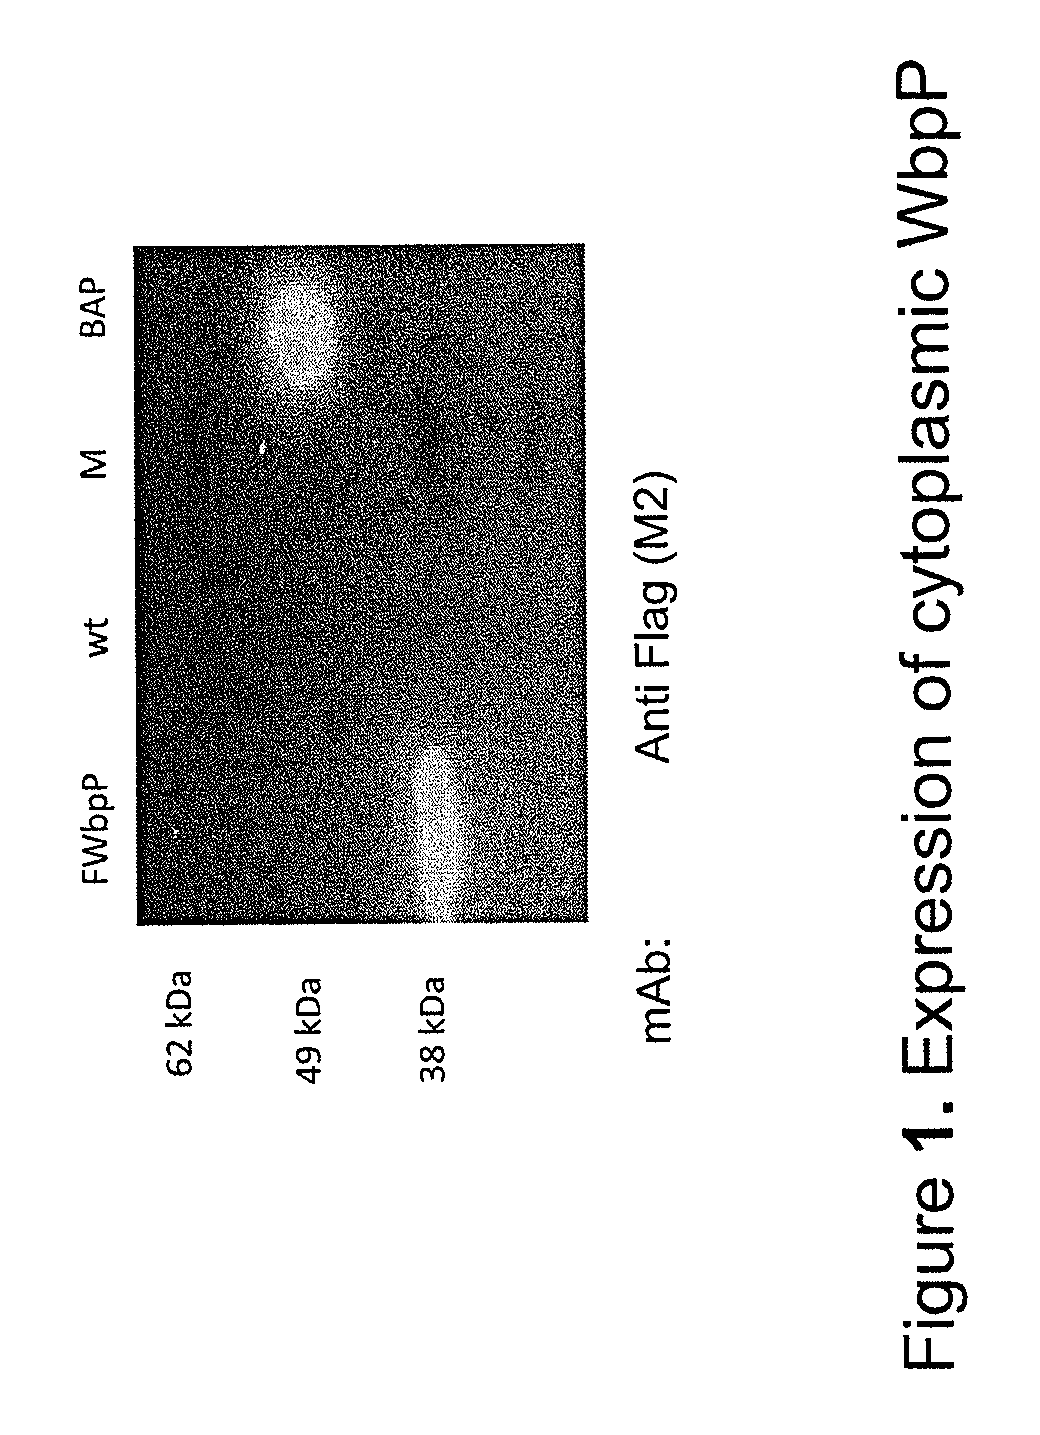 Methods for glyco-engineering plant cells for controlled human O-glycosylation